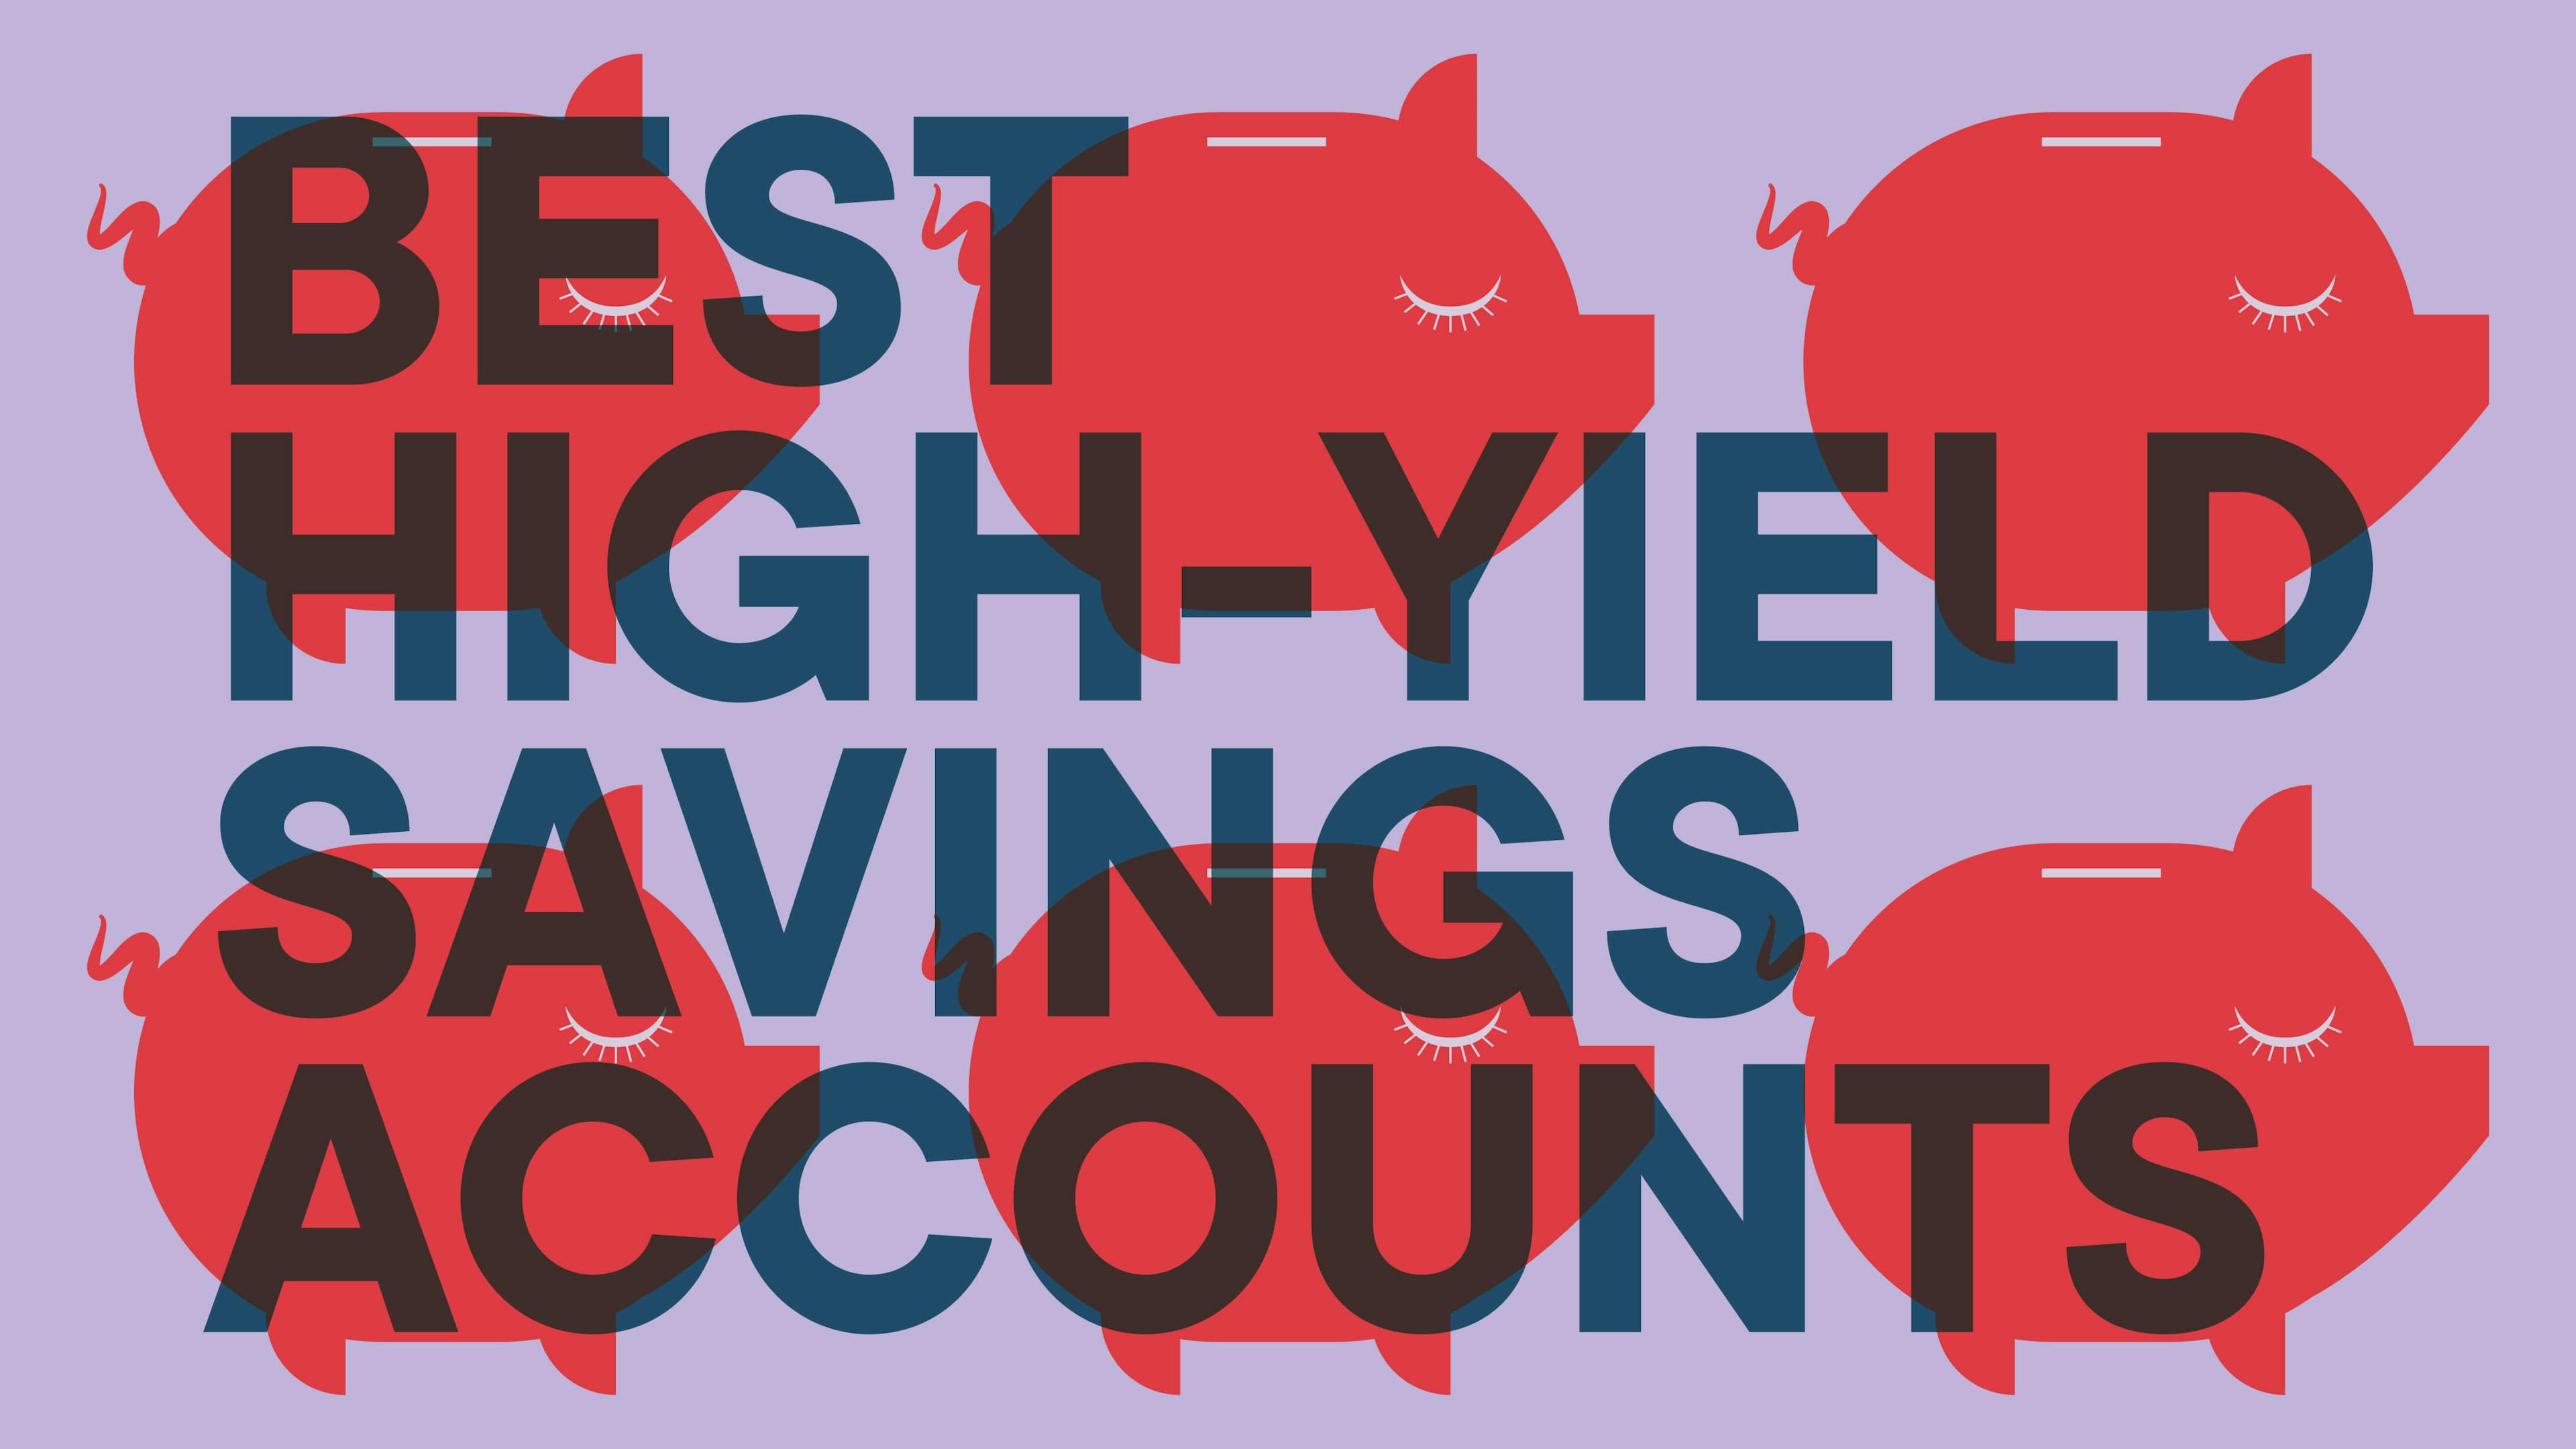 Looking for a savings account that fits your needs? Find out which high yield savings accounts offer the best benefits and learn how to get started.